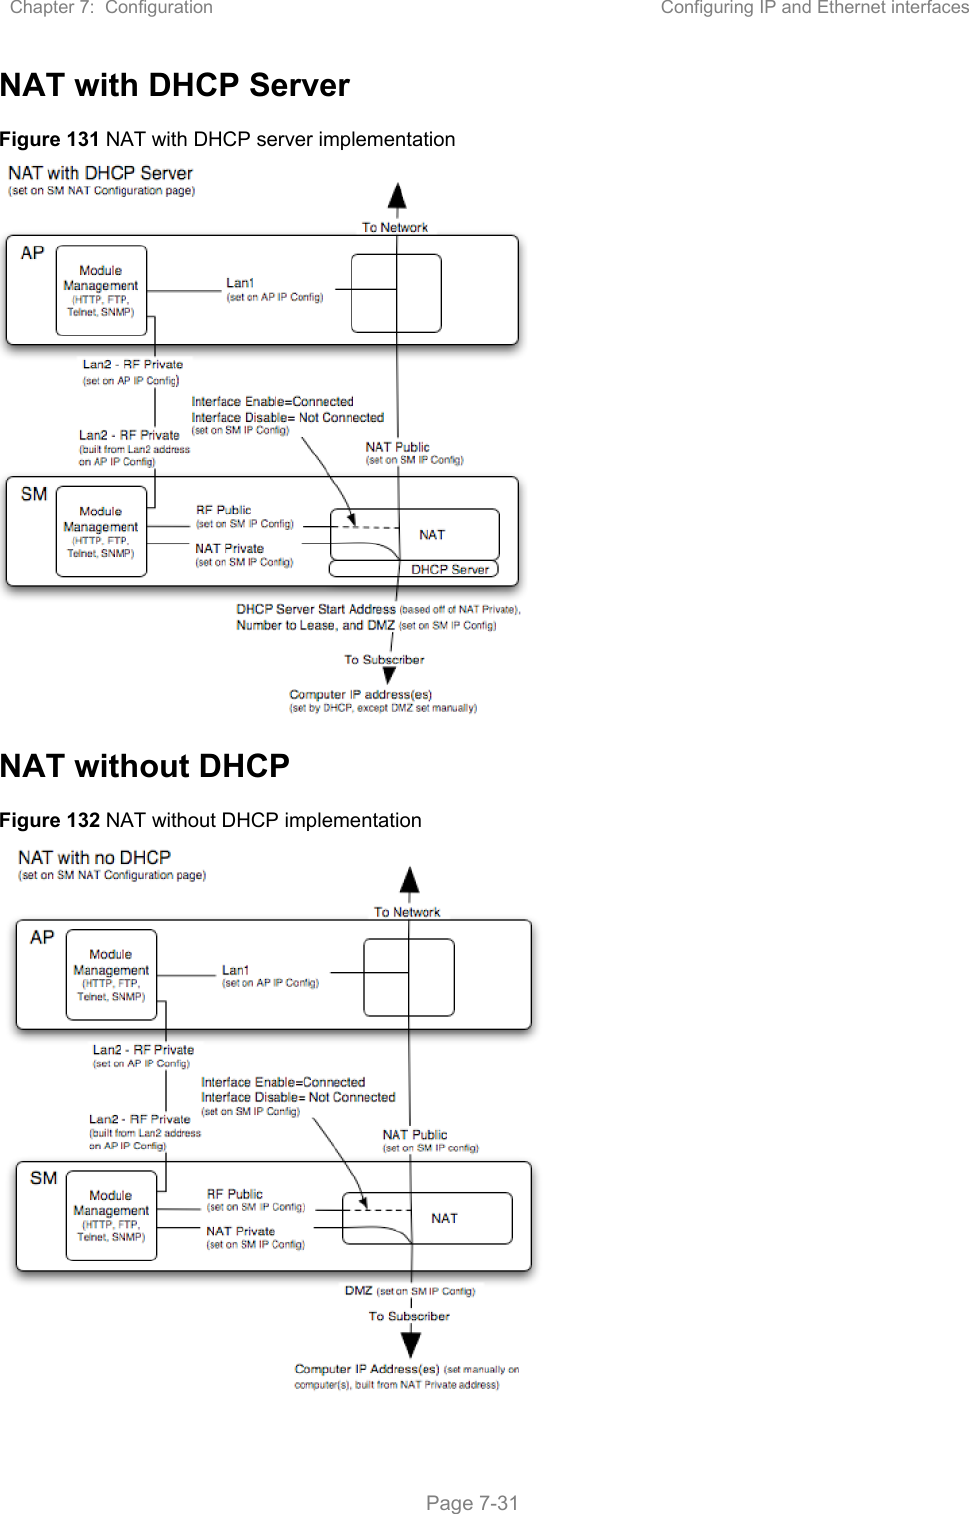 Chapter 7:  Configuration  Configuring IP and Ethernet interfaces   Page 7-31 NAT with DHCP Server Figure 131 NAT with DHCP server implementation  NAT without DHCP Figure 132 NAT without DHCP implementation  